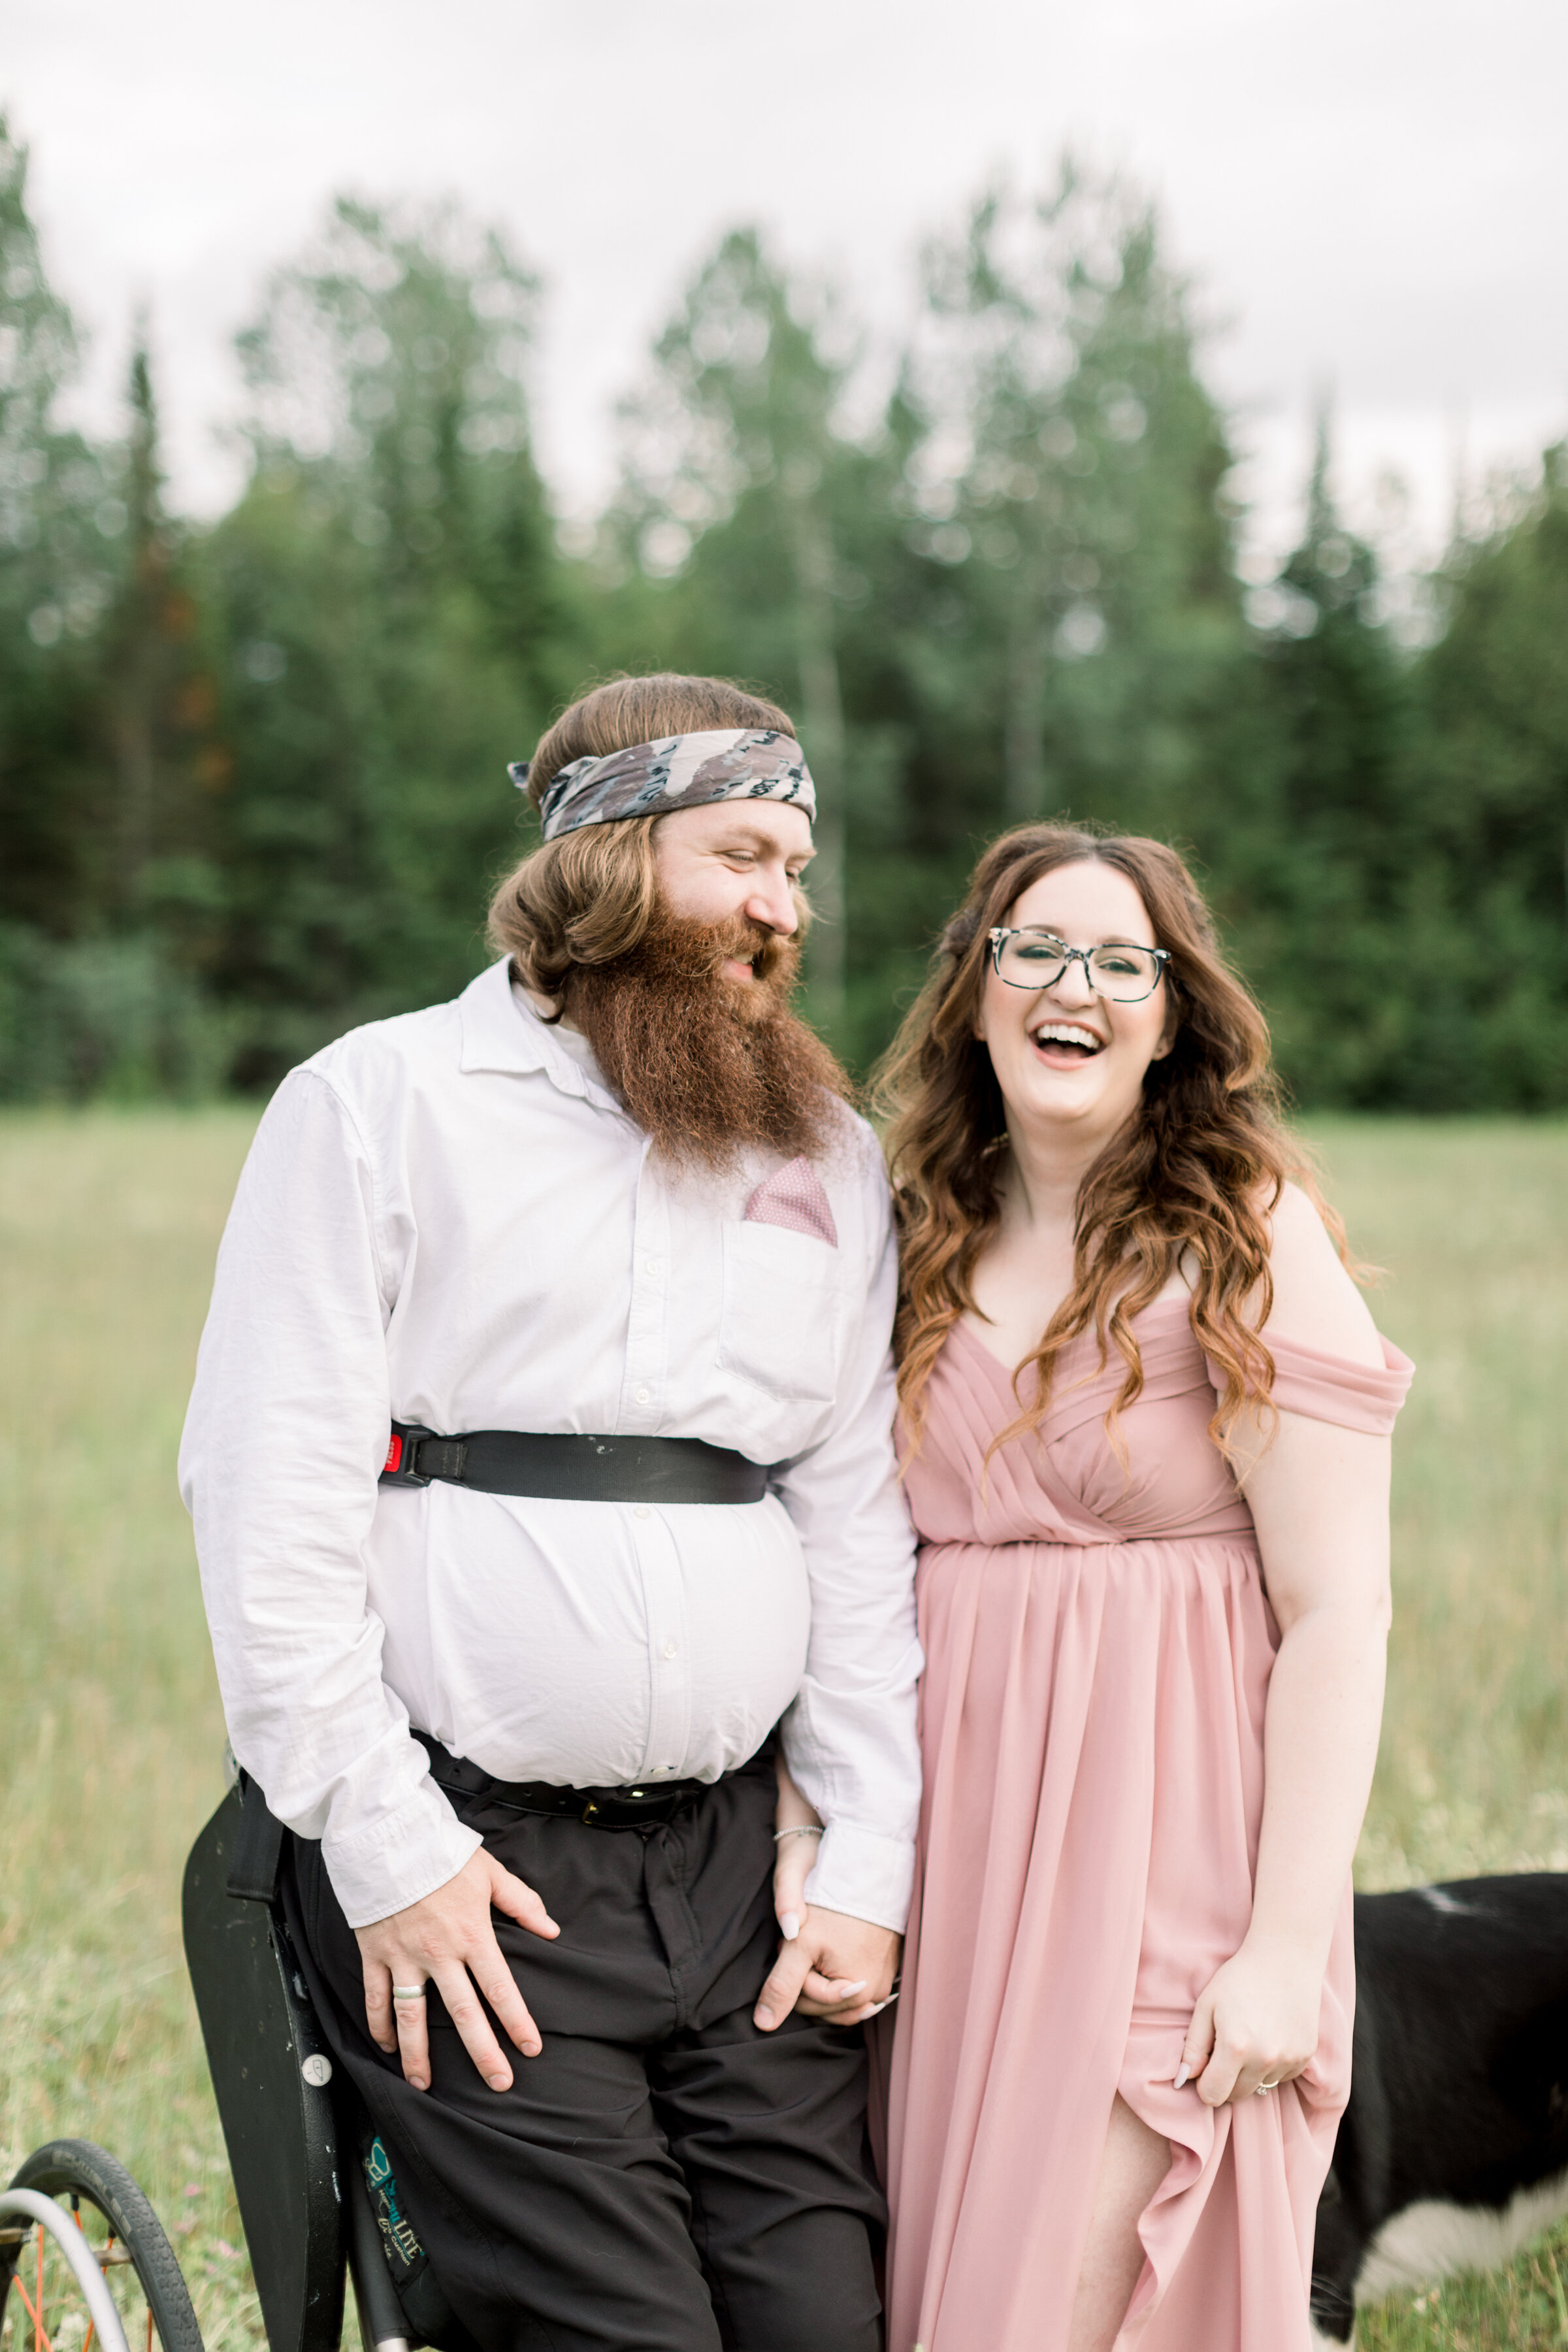  A beautiful couple laugh together in a grassy field in Smith Falls, Ontario, Canada in a rustic engagement session by Chelsea Mason Photography. Standup chair client attire inspiration ideas and goals paraplegic engagement session men's semi formal 